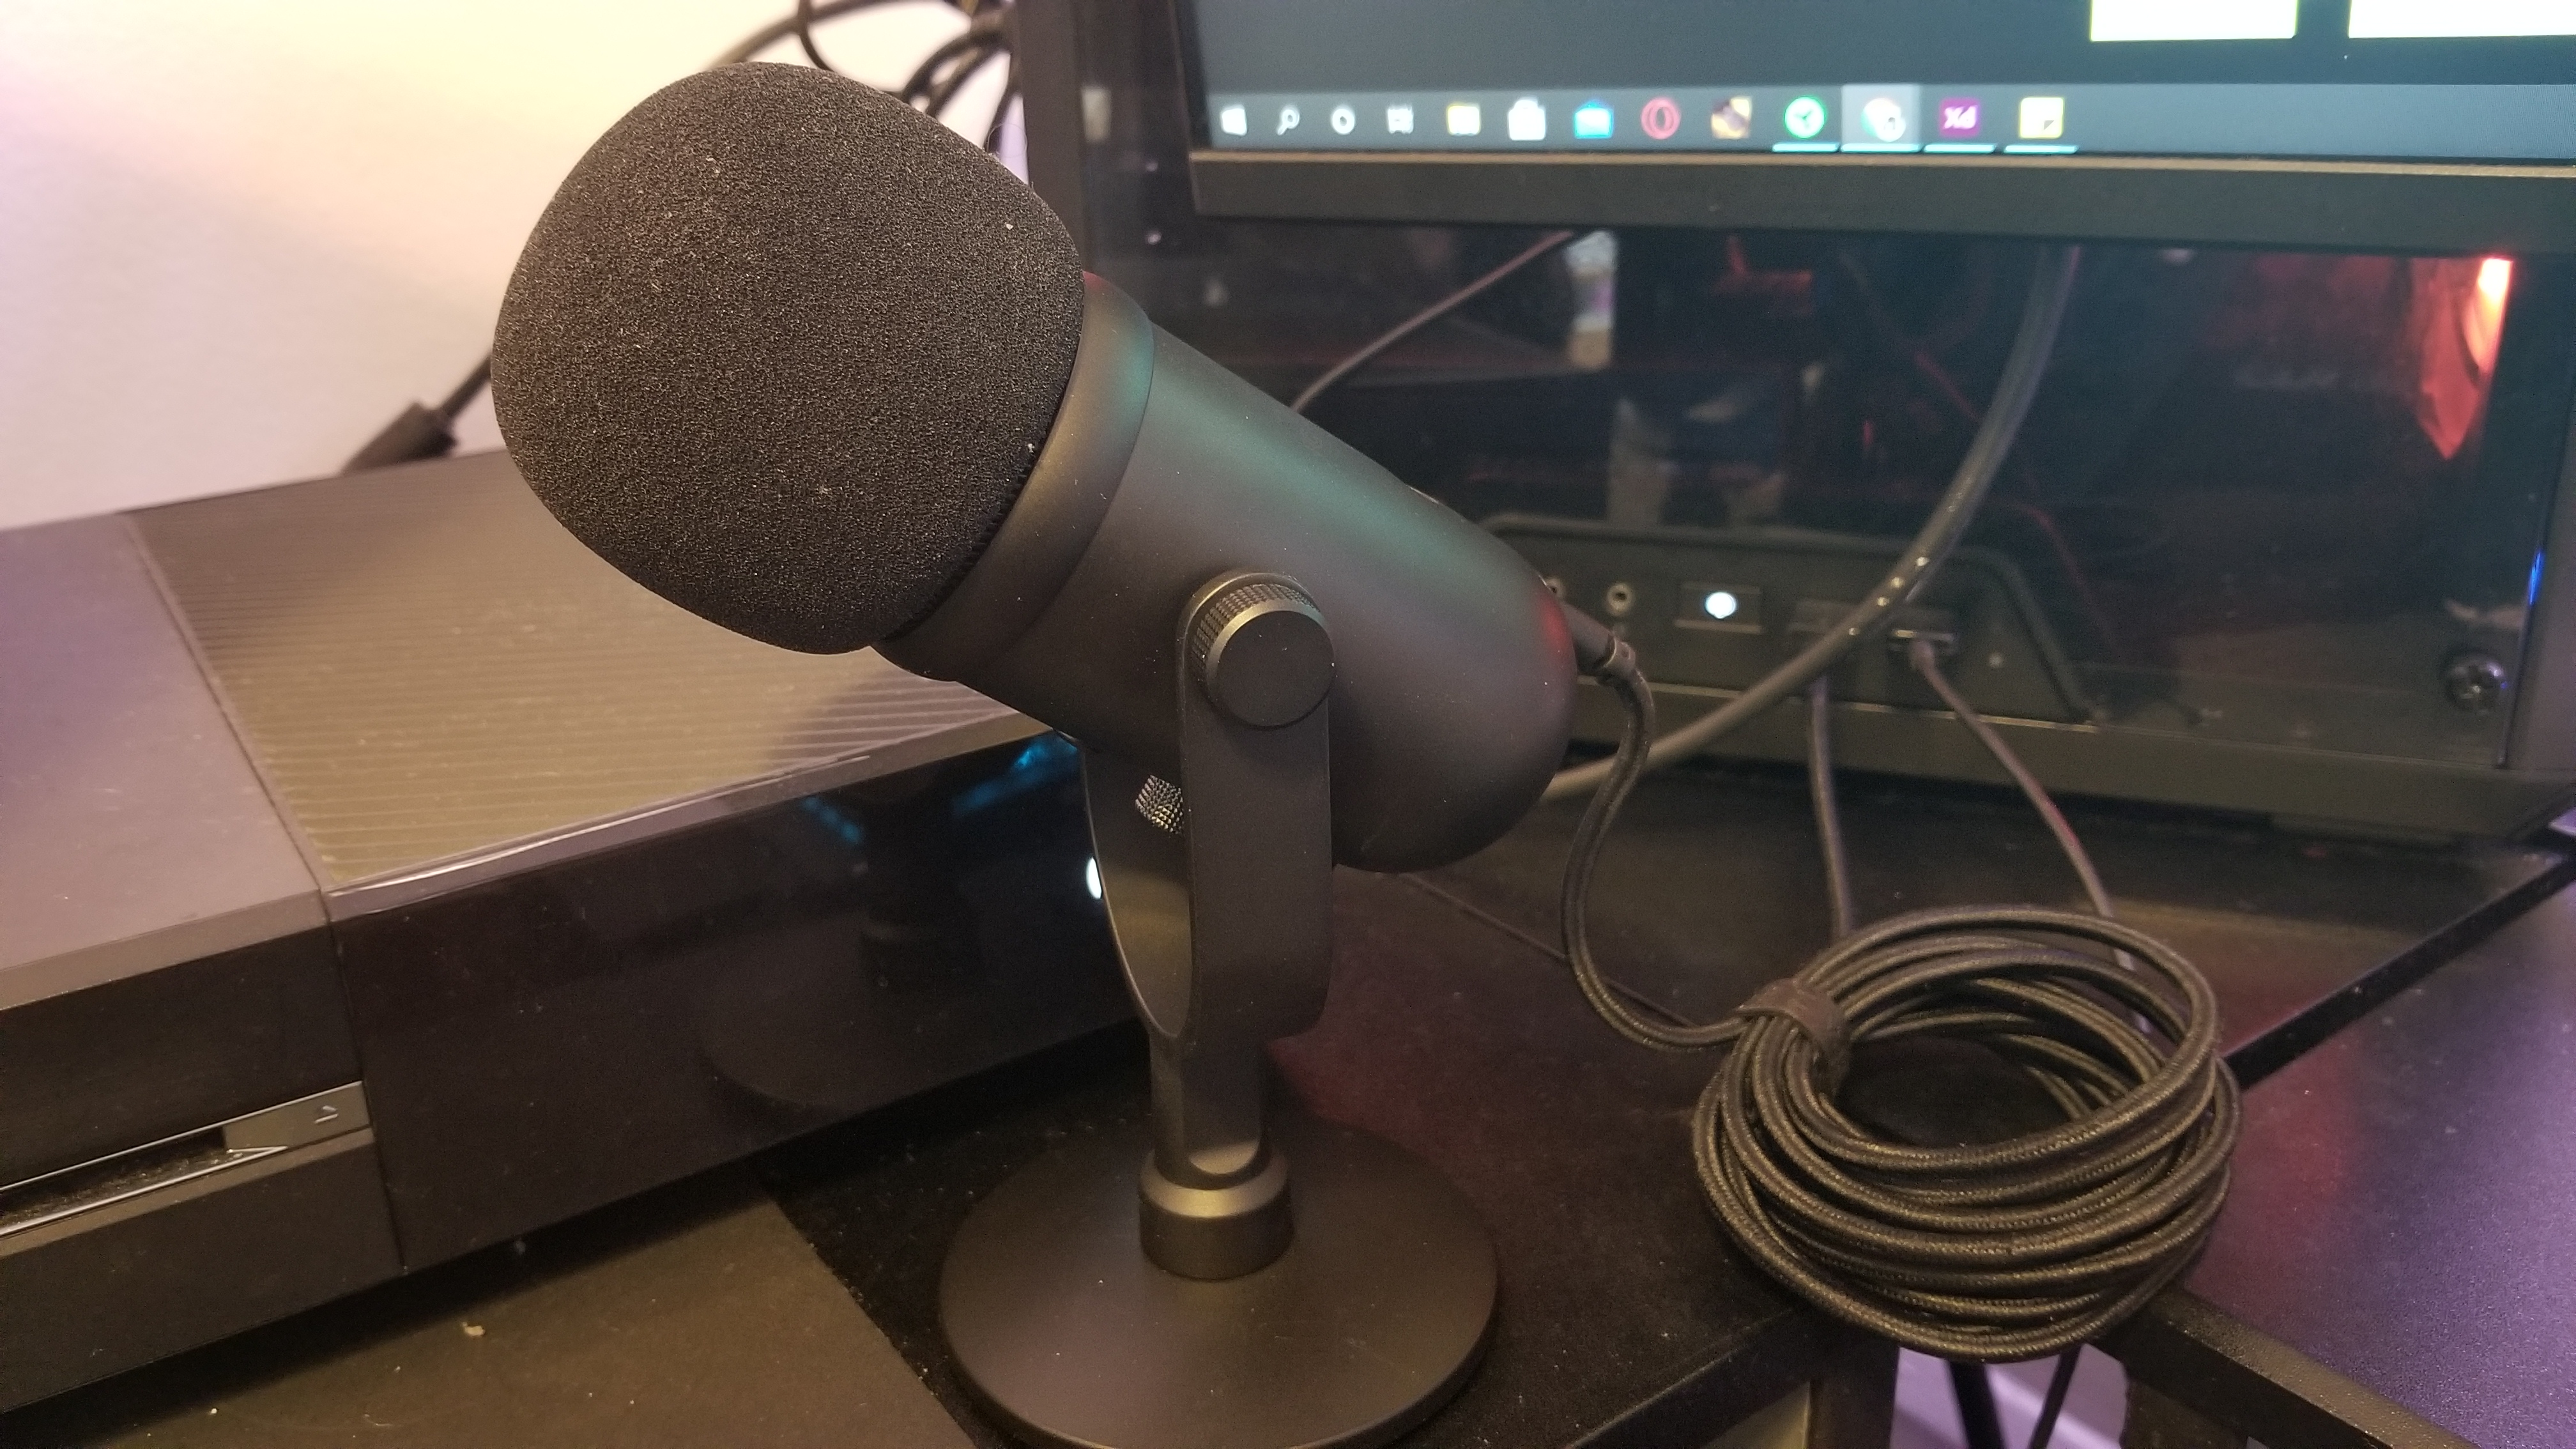 Razer Seiren V2 X USB Microphone with Broadcast Arm and Pop Filter Kit